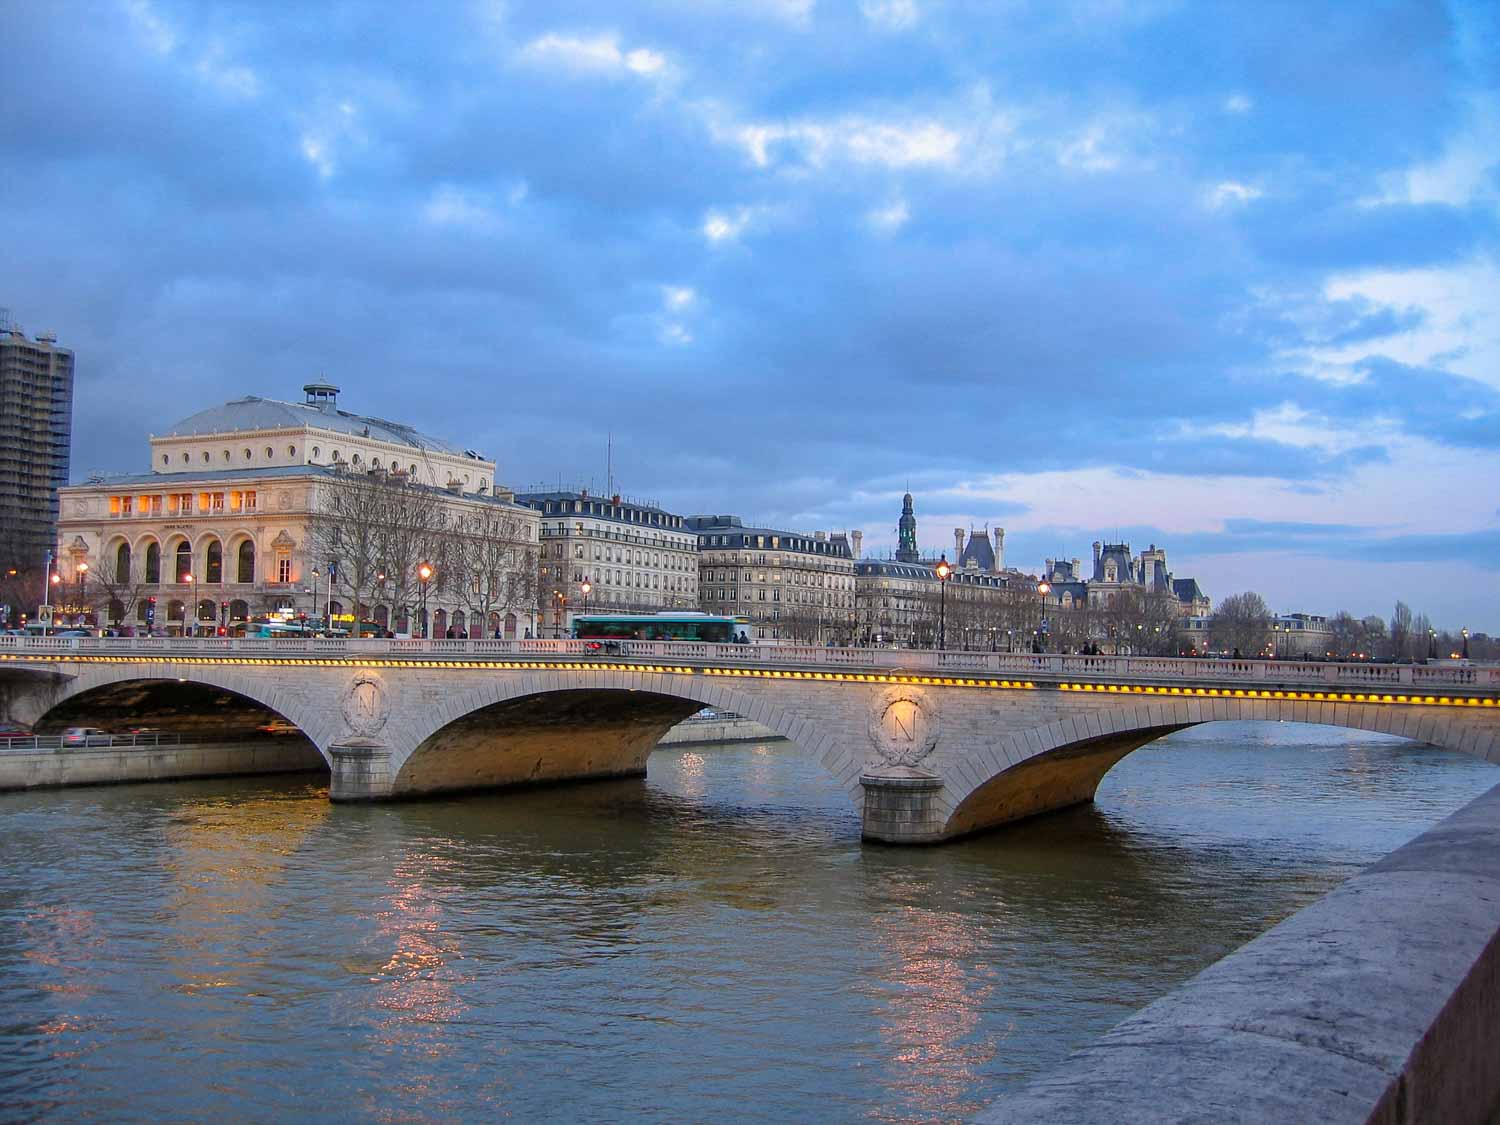 Along the River Seine at dusk